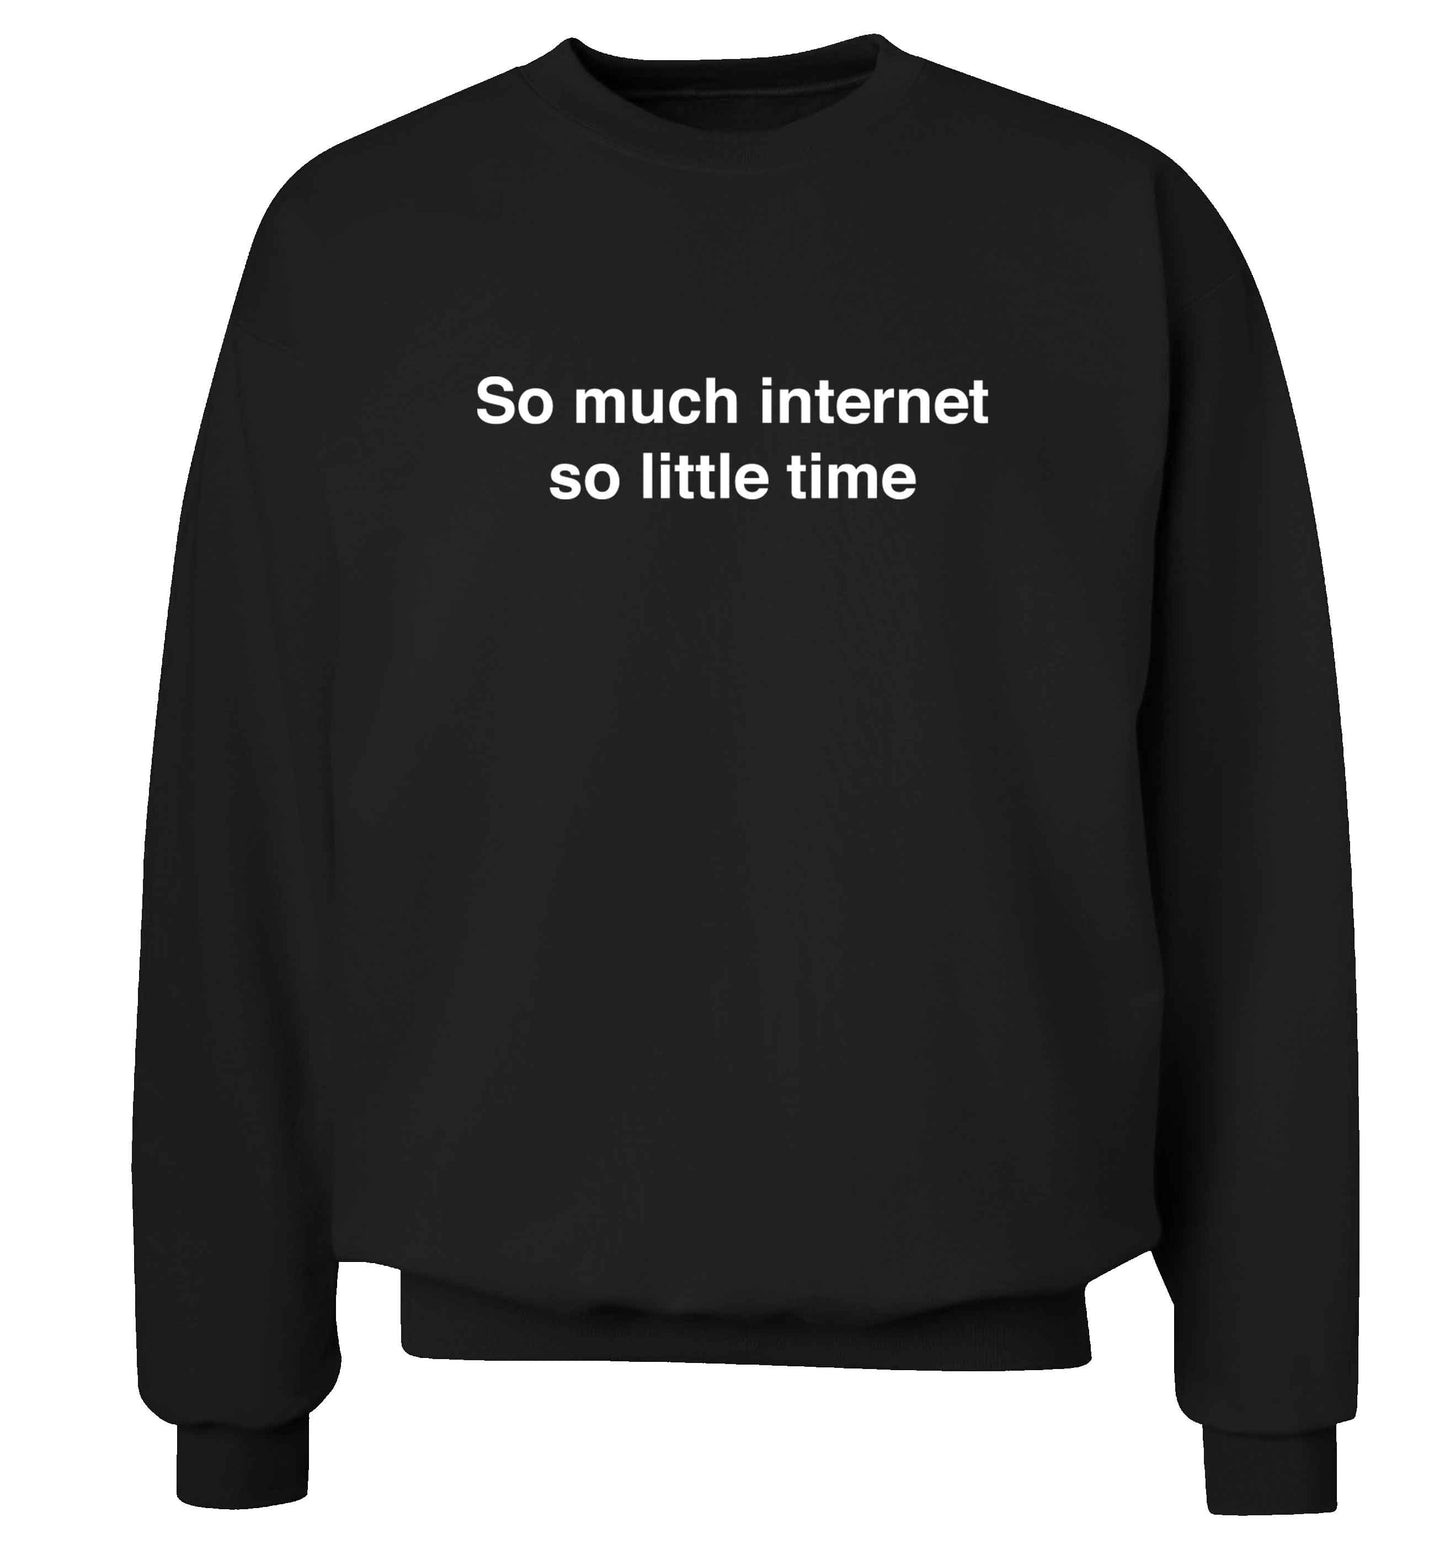 So much internet so little time adult's unisex black sweater 2XL